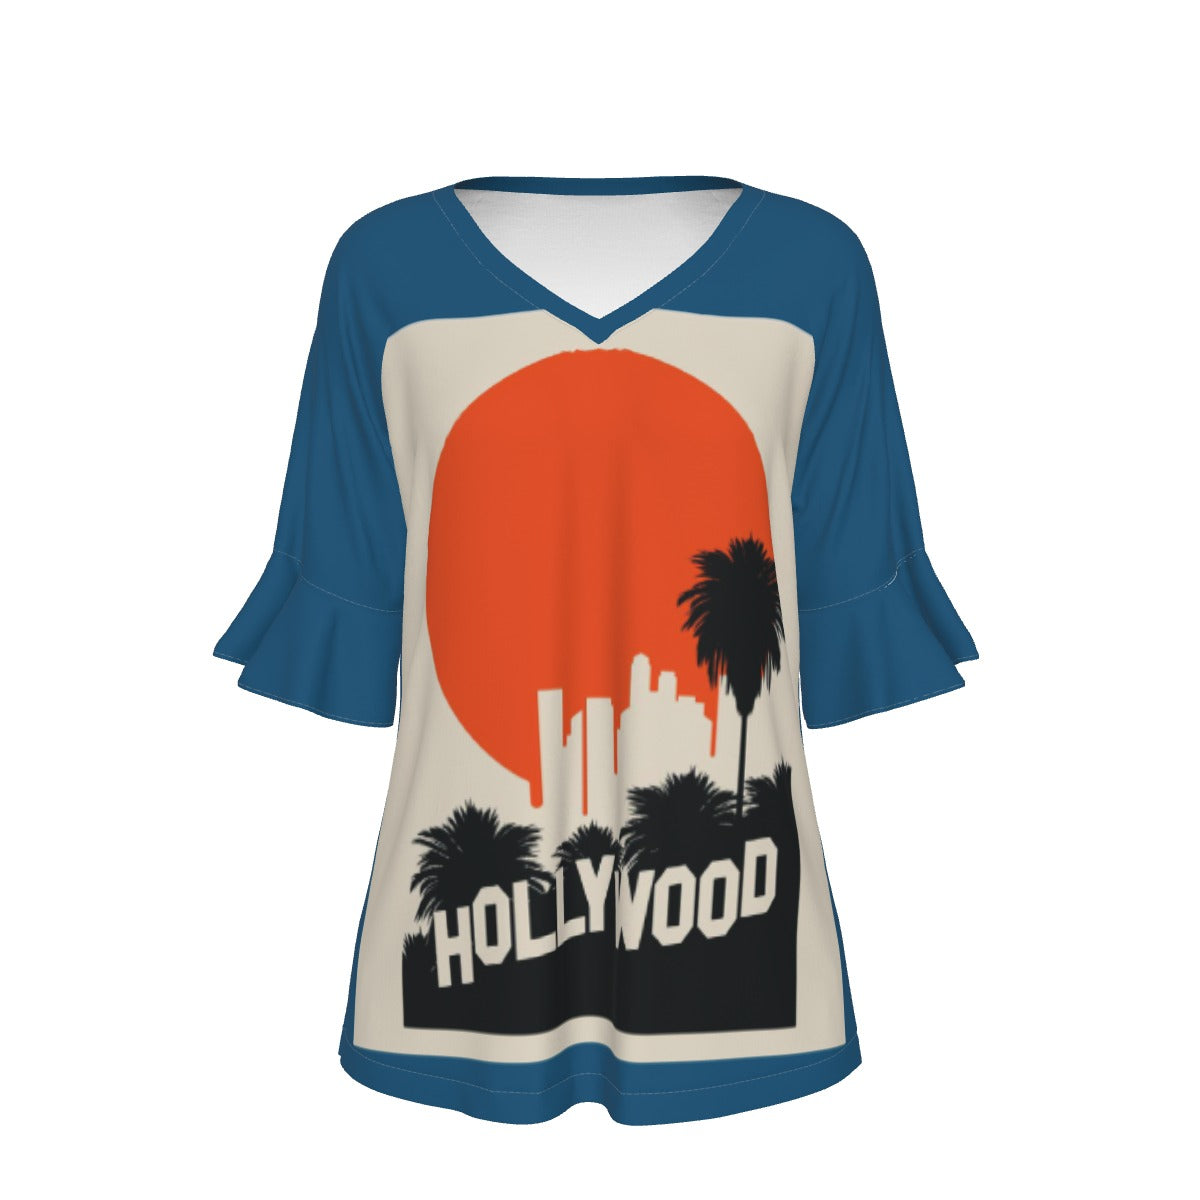 Vintage Hollywood - V-neck Women's T-shirt With Bell Sleeve